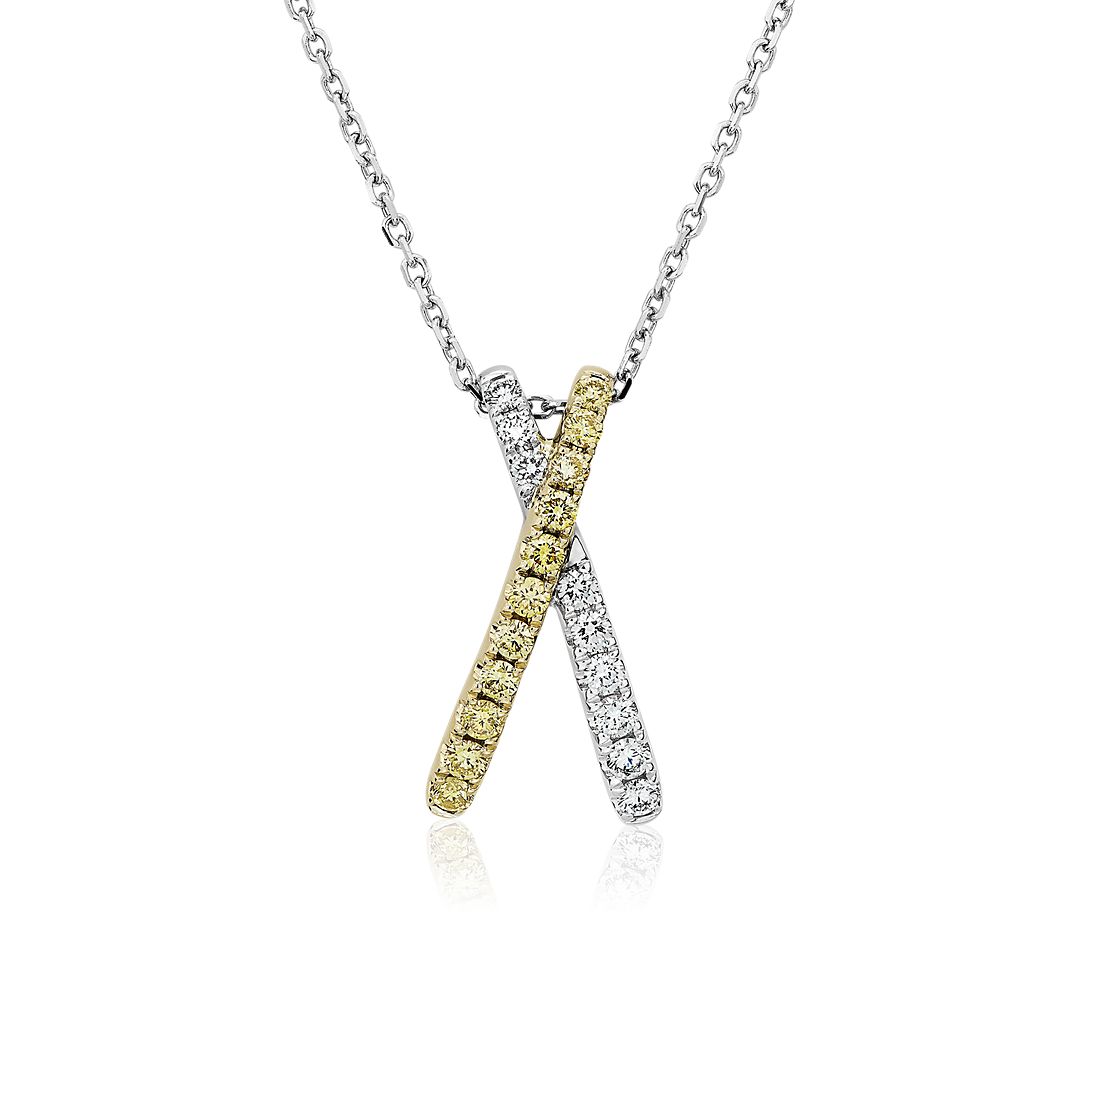 White and Yellow Diamond Crossover Pendant in 14k White and Yellow Gold (0.52 ct. tw.)